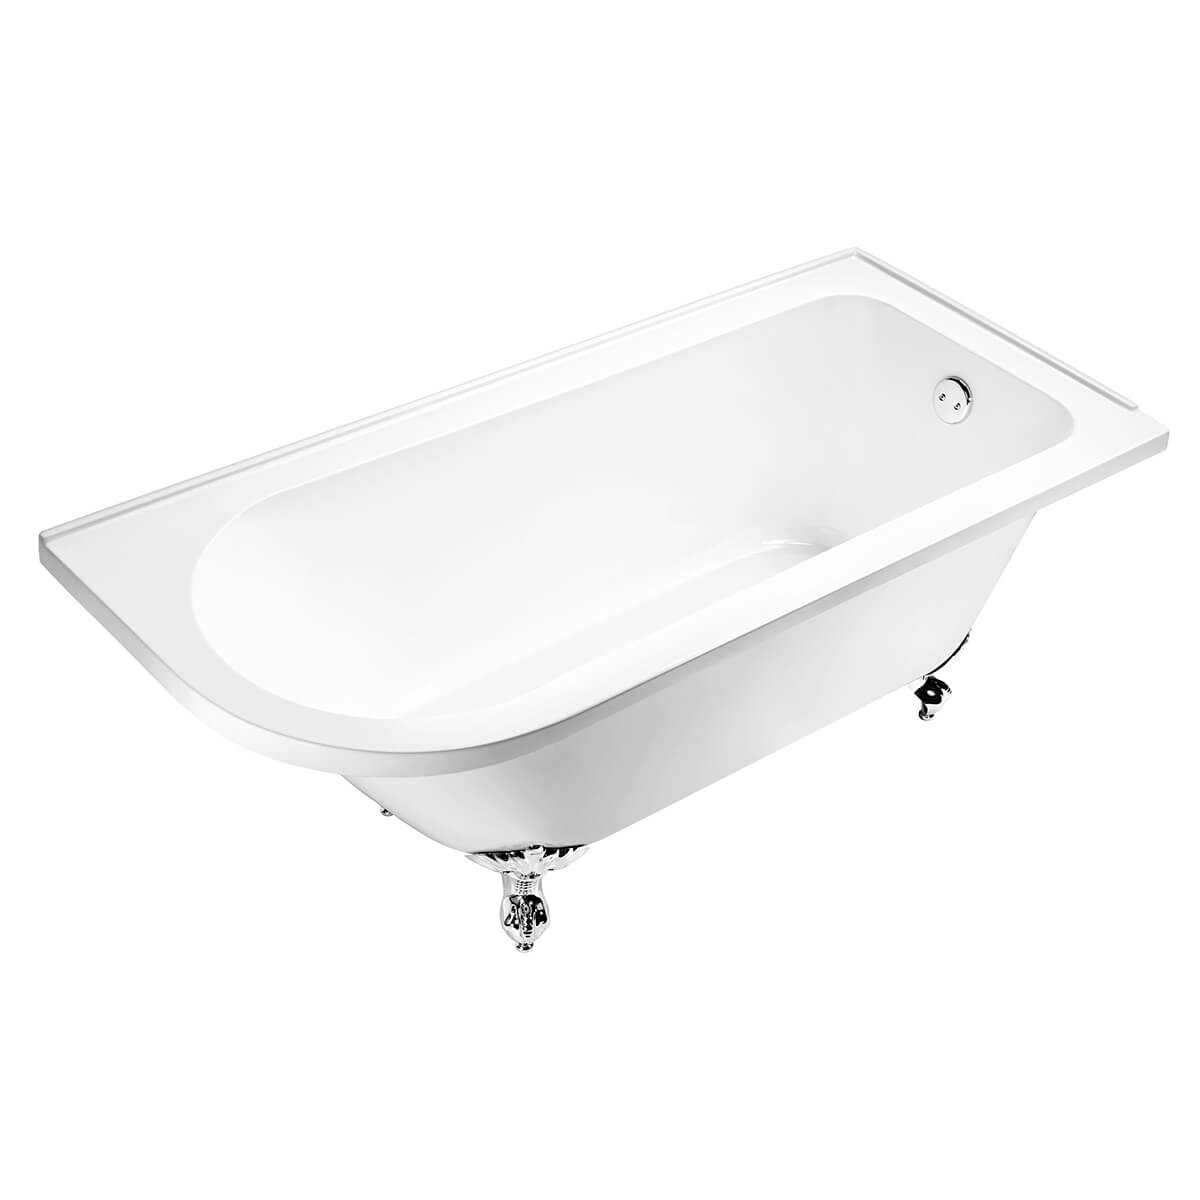 Balmoral 1700mm Freestanding Right Hand Shower Bath with Chrome Claw & Ball Feet (11259)